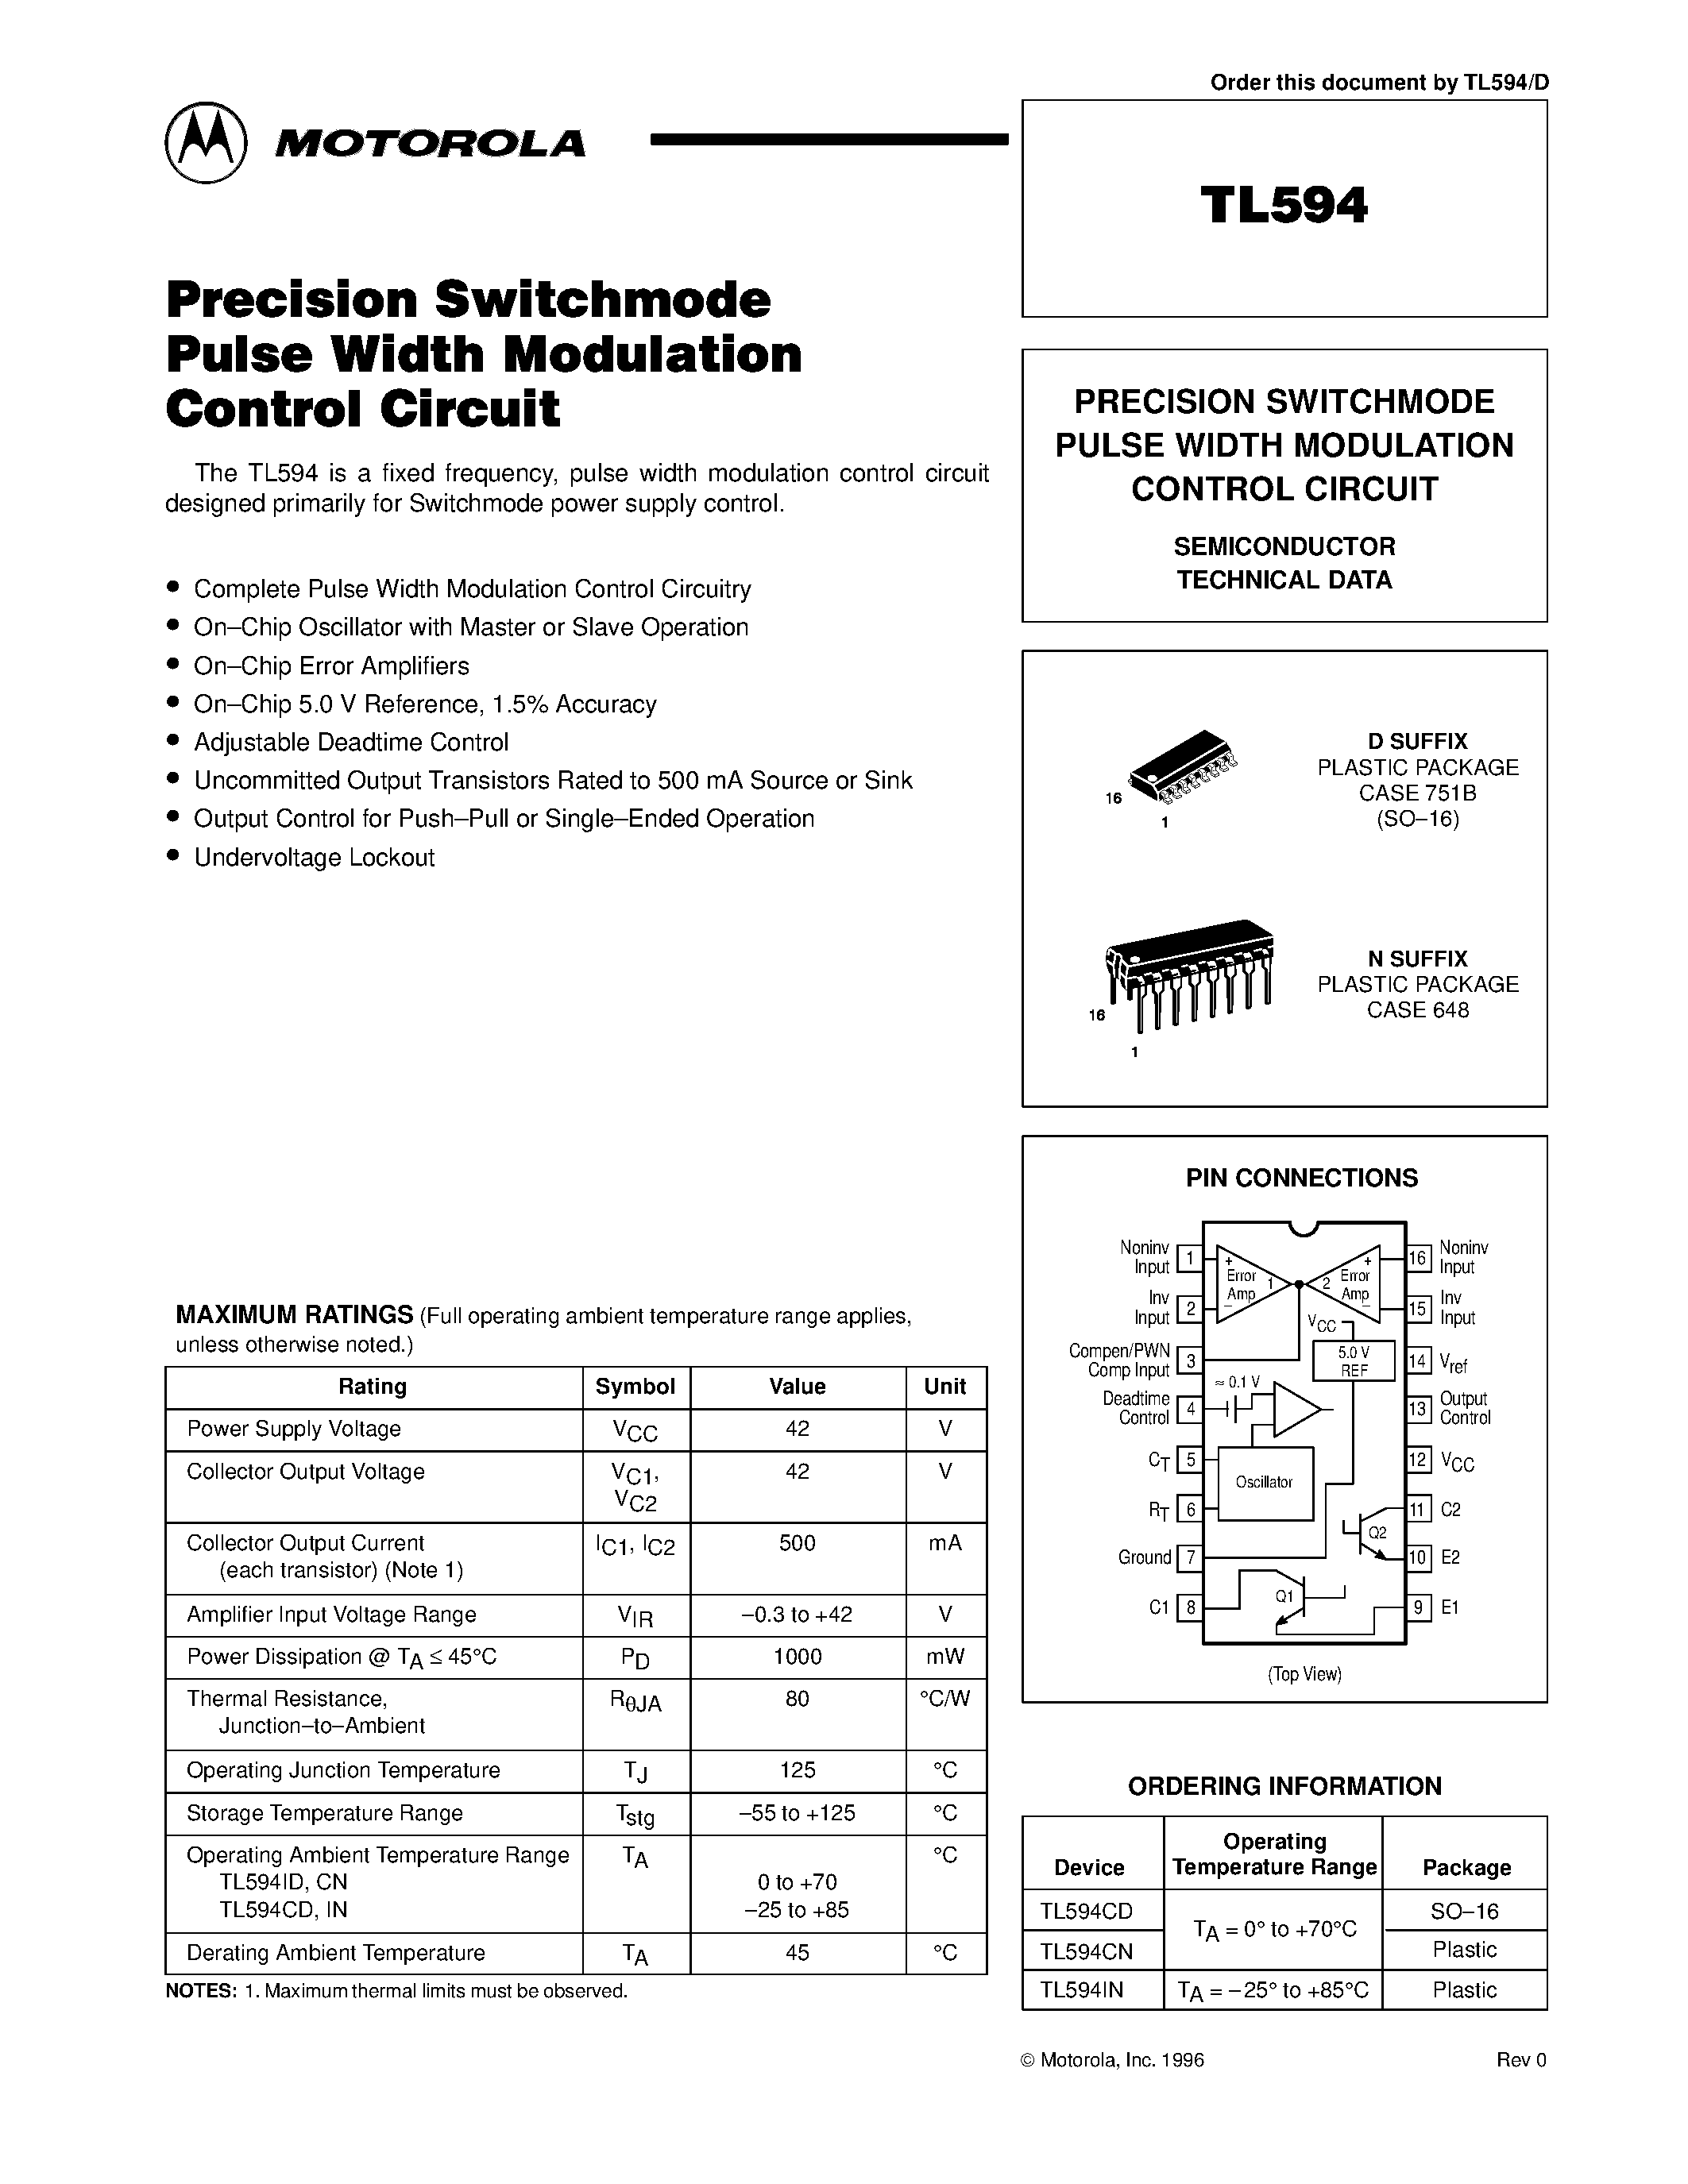 Datasheet TL594 - PRECISION SWITCHMODE PULSE WIDTH MODULATION CONTROL CIRCUIT page 1